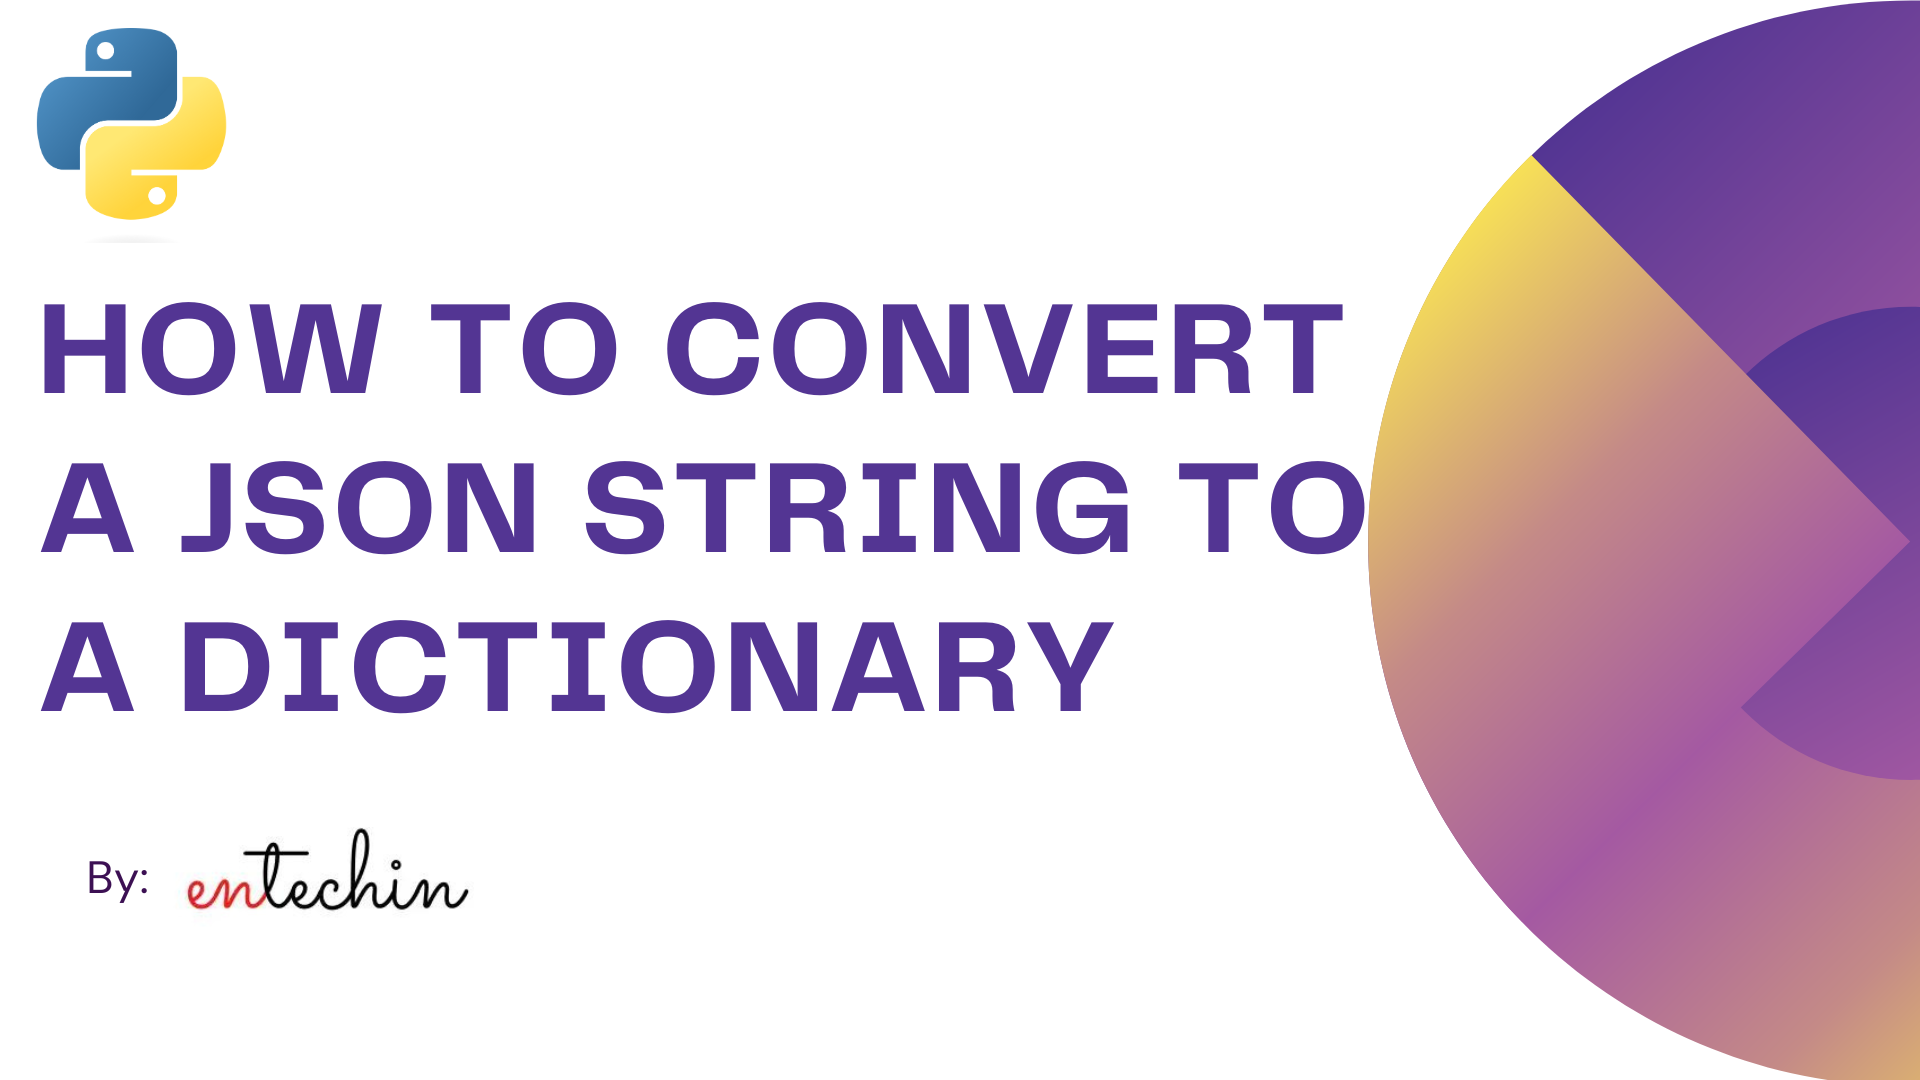 How to convert a JSON String to a dictionary in python.